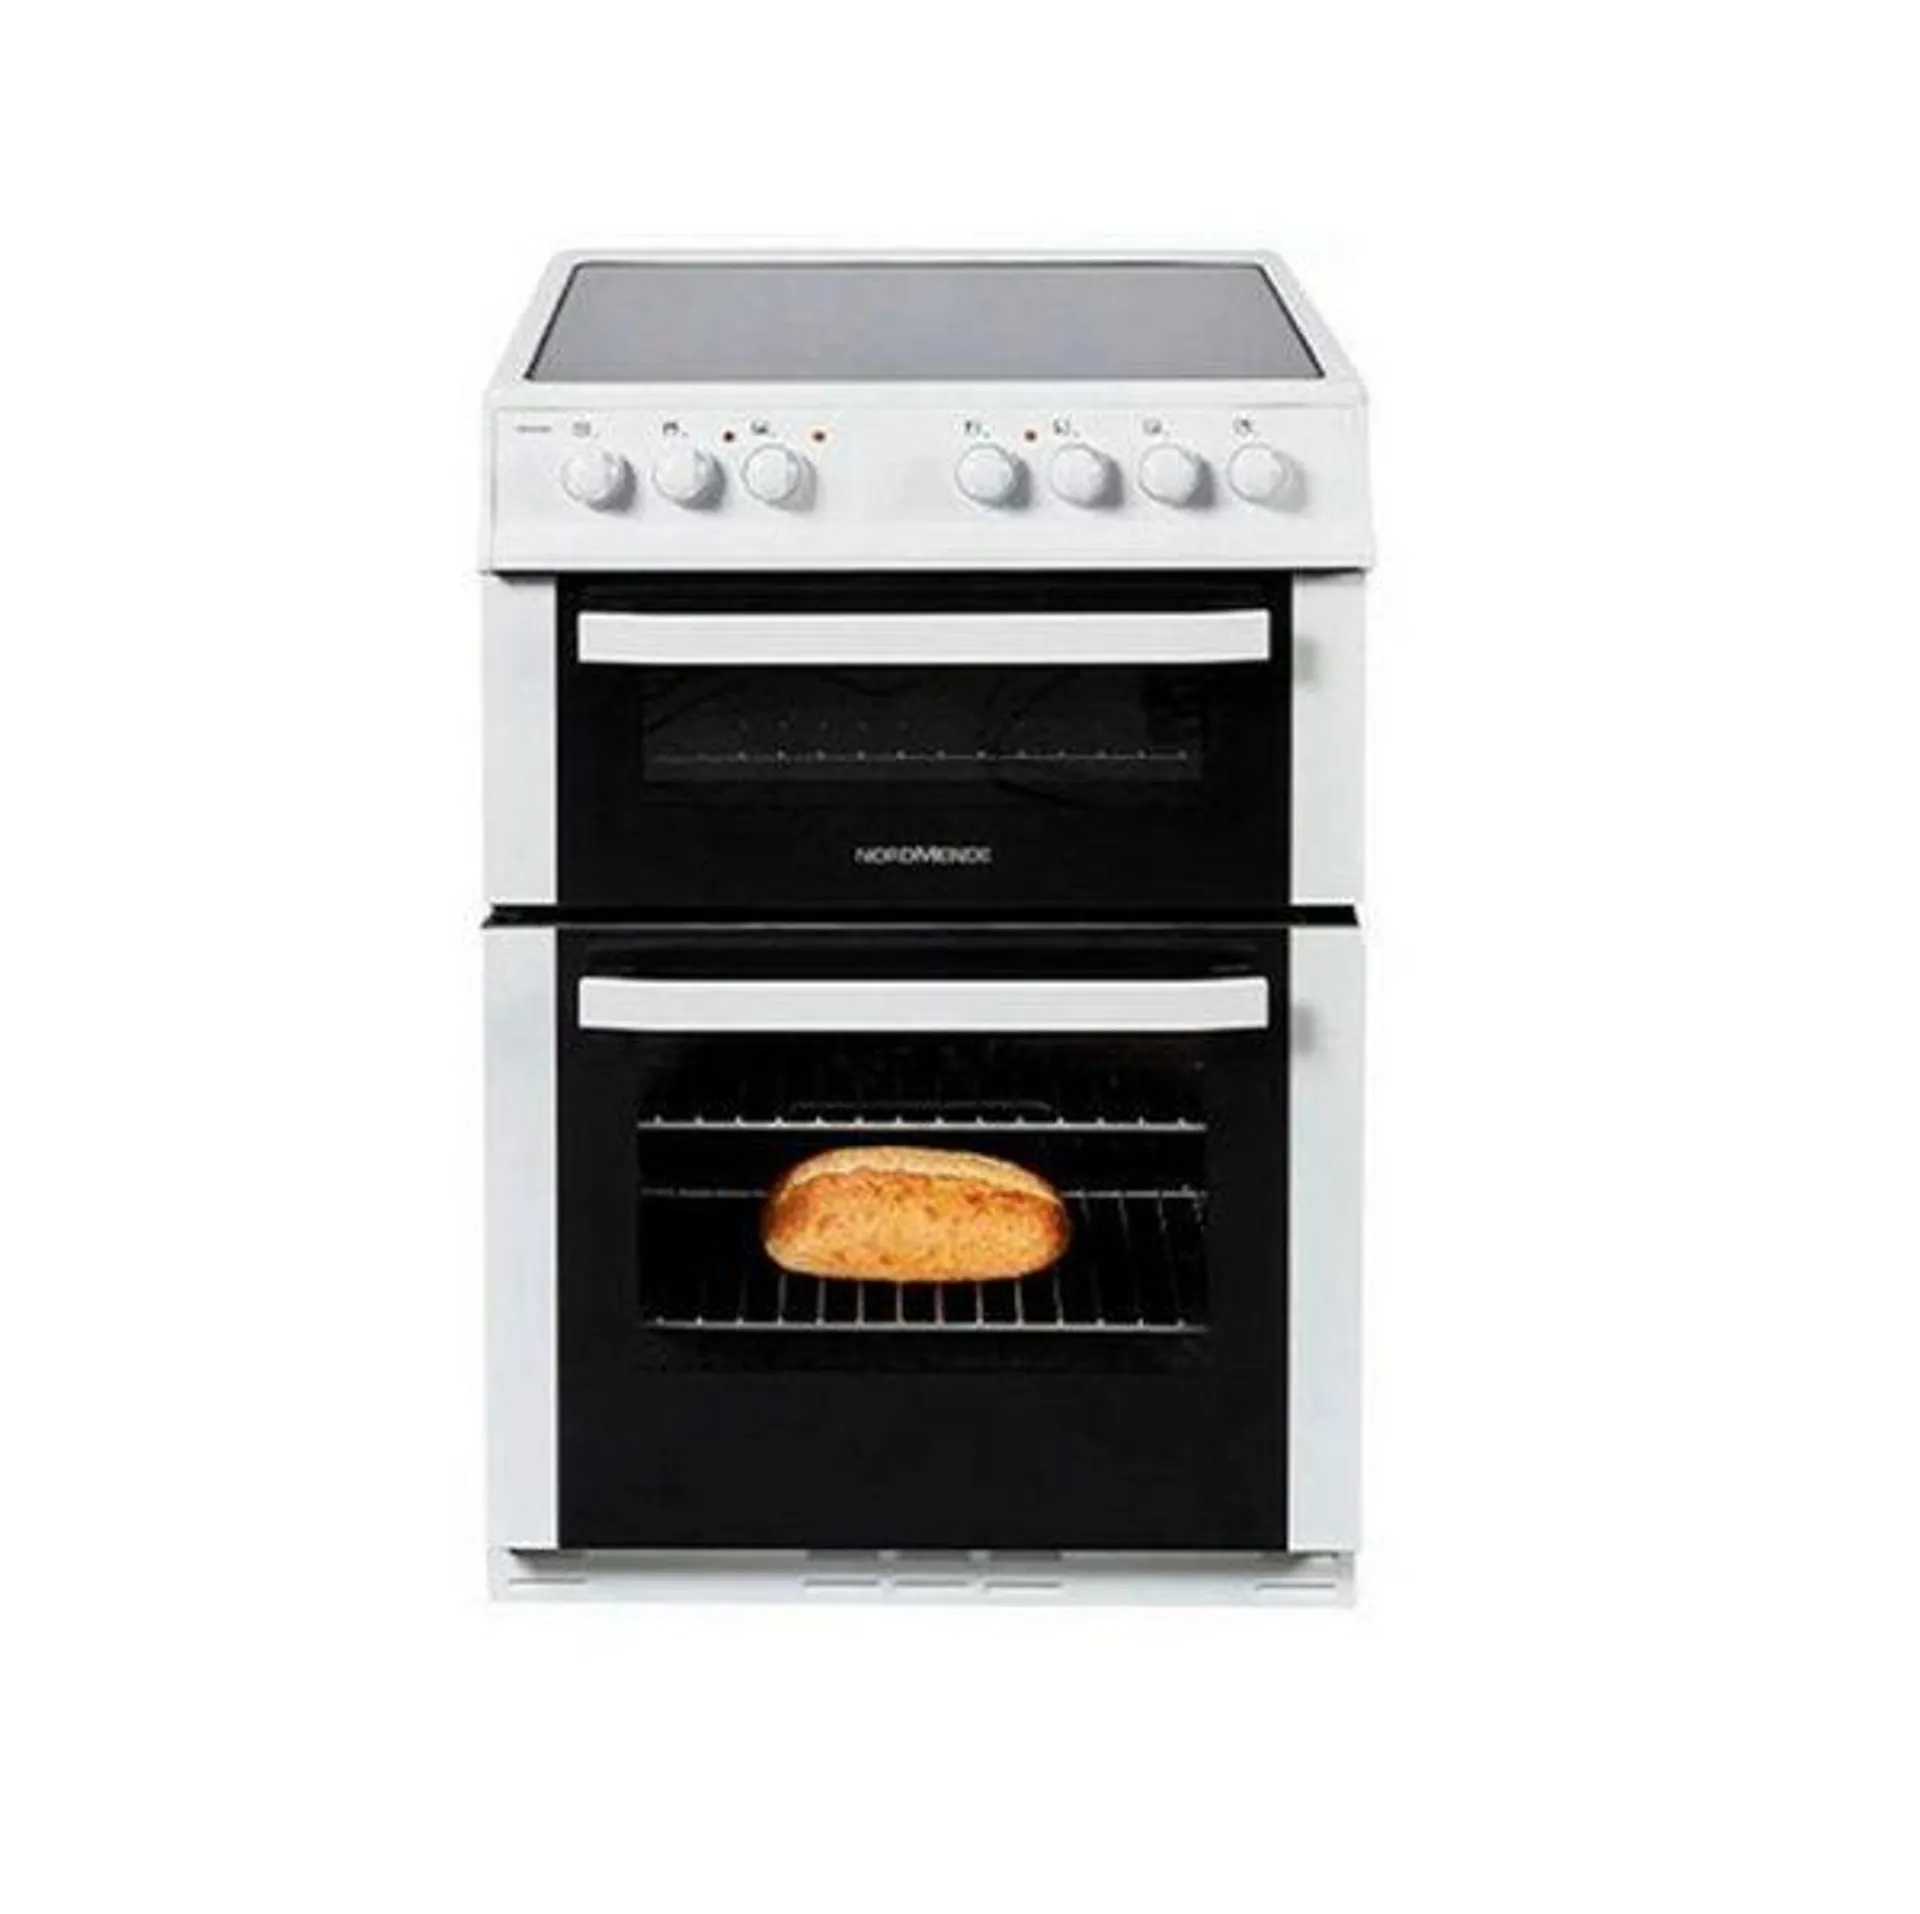 Nordmende 60cm Freestanding Electric Cooker – White